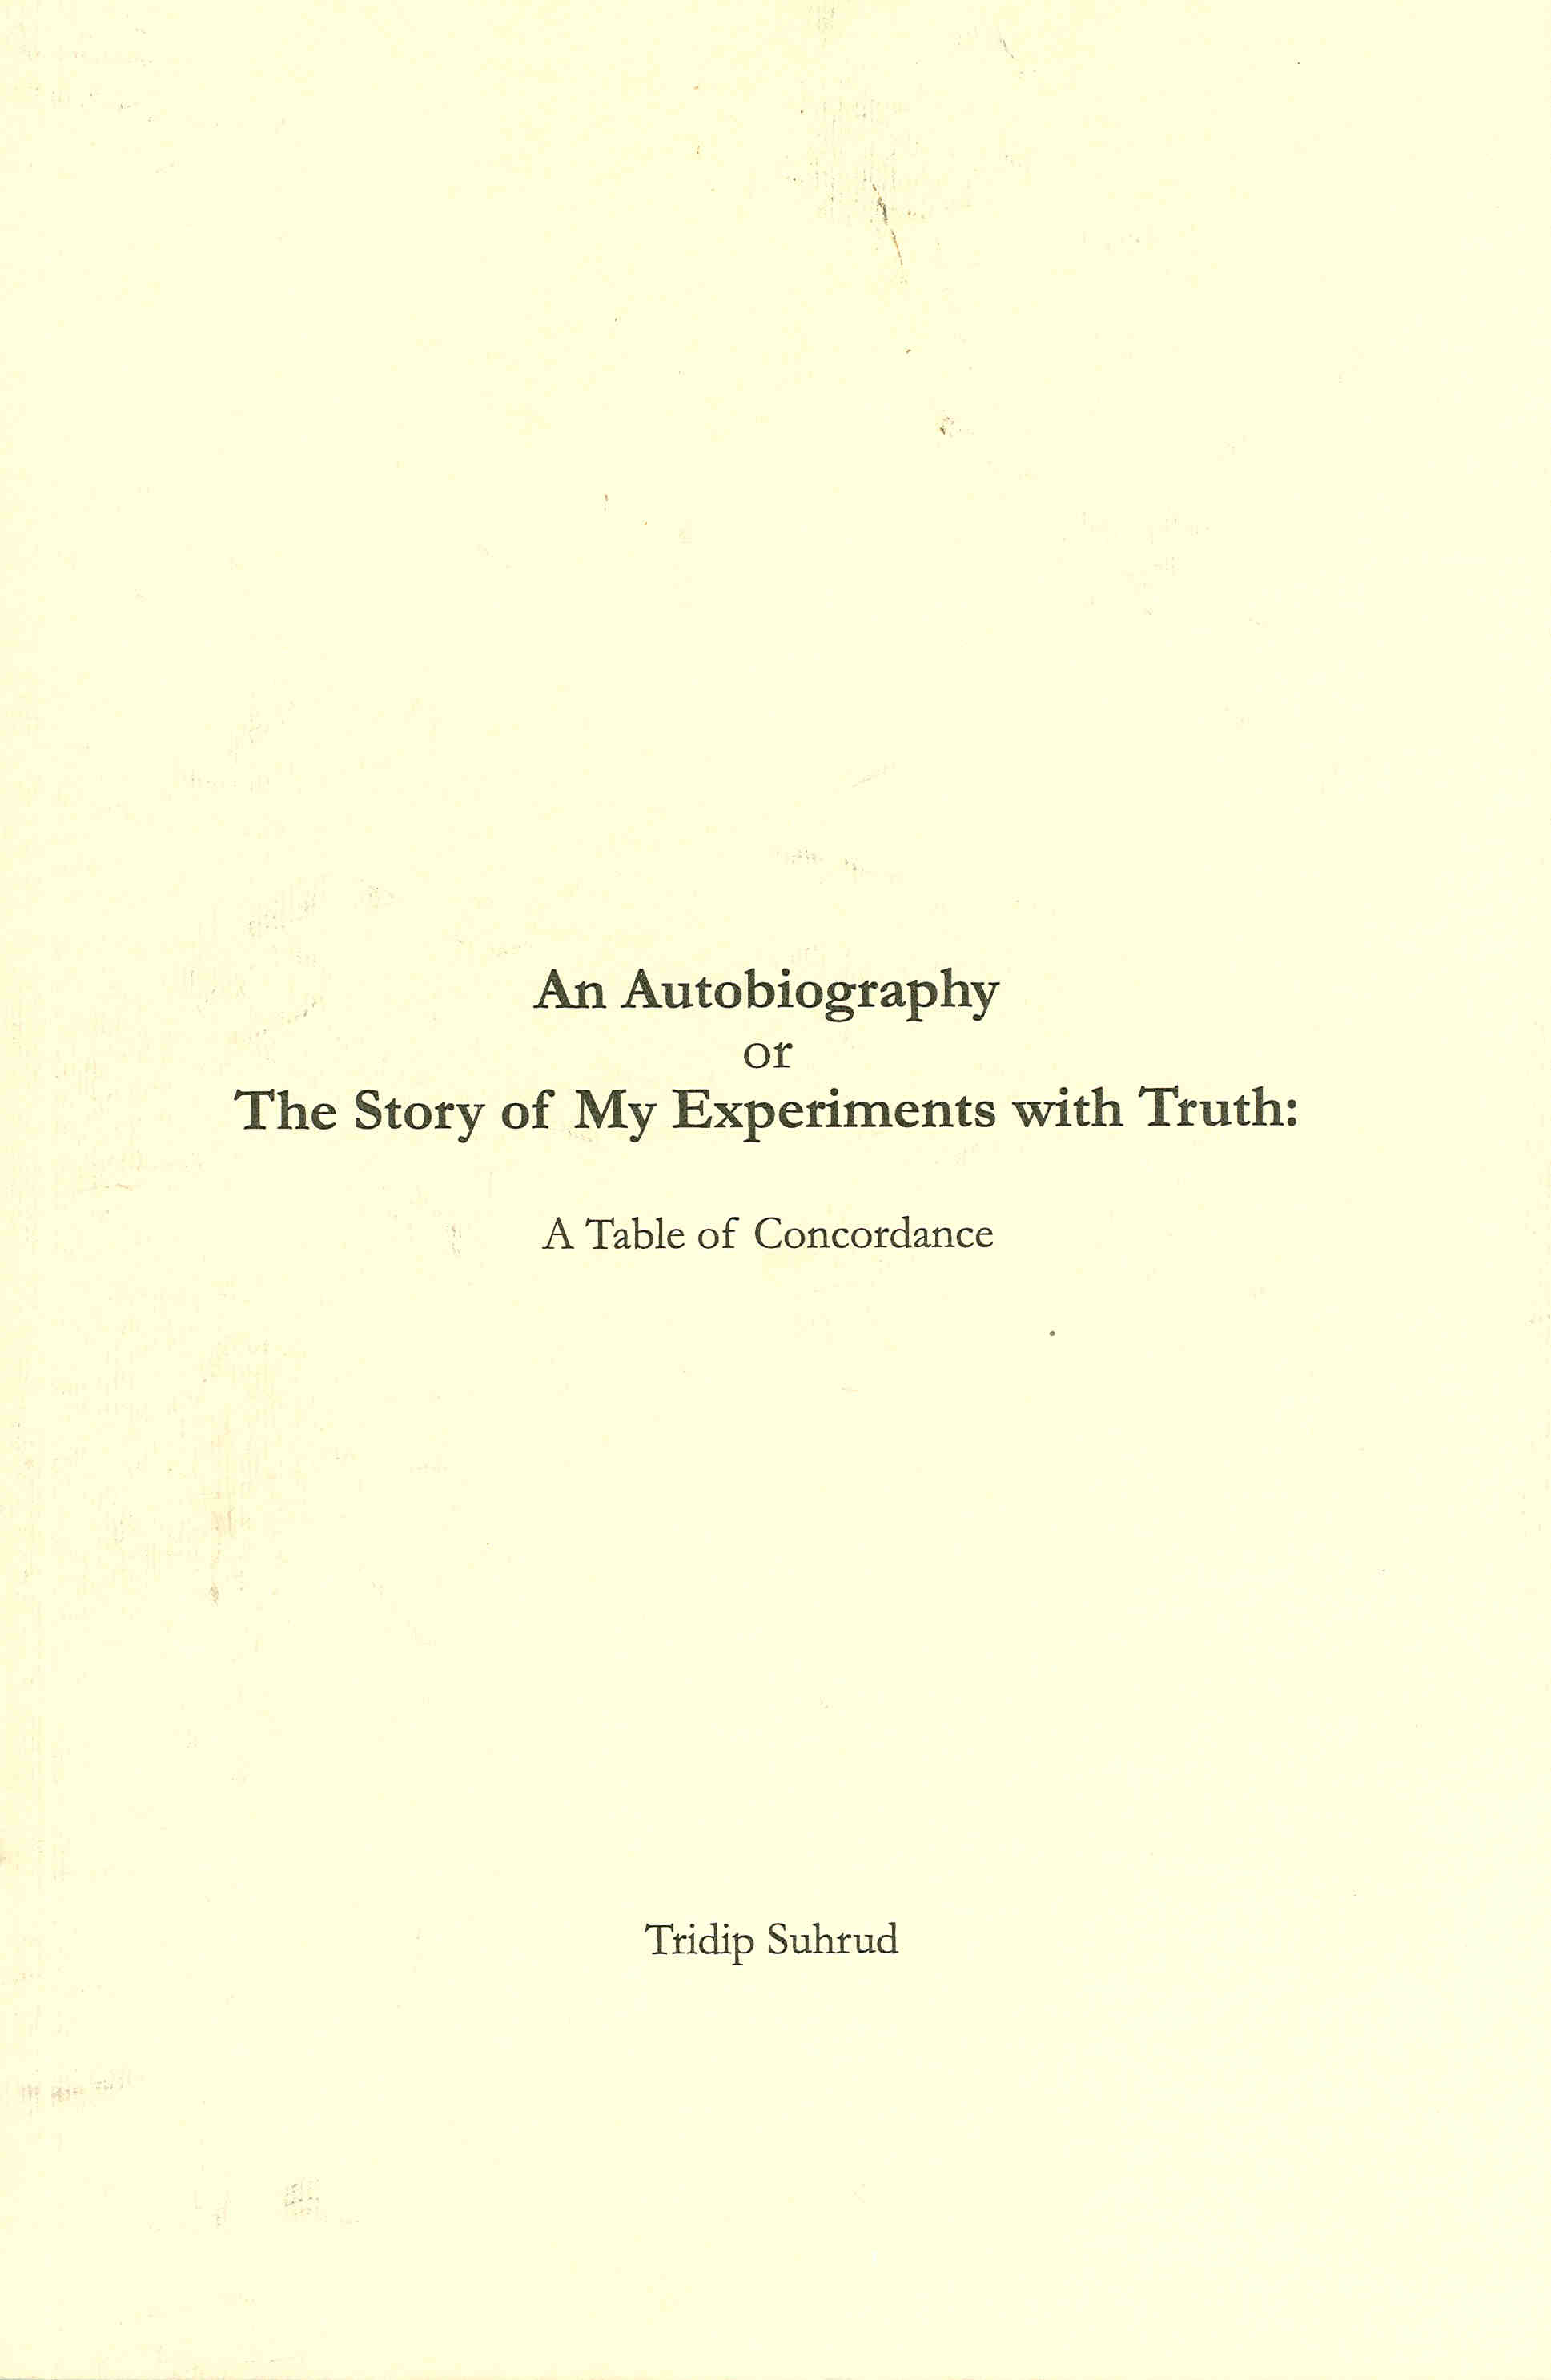 Suhrud, Tridip.  An autobiography or the Story of My Experiments with Truth: A Table of Concordance